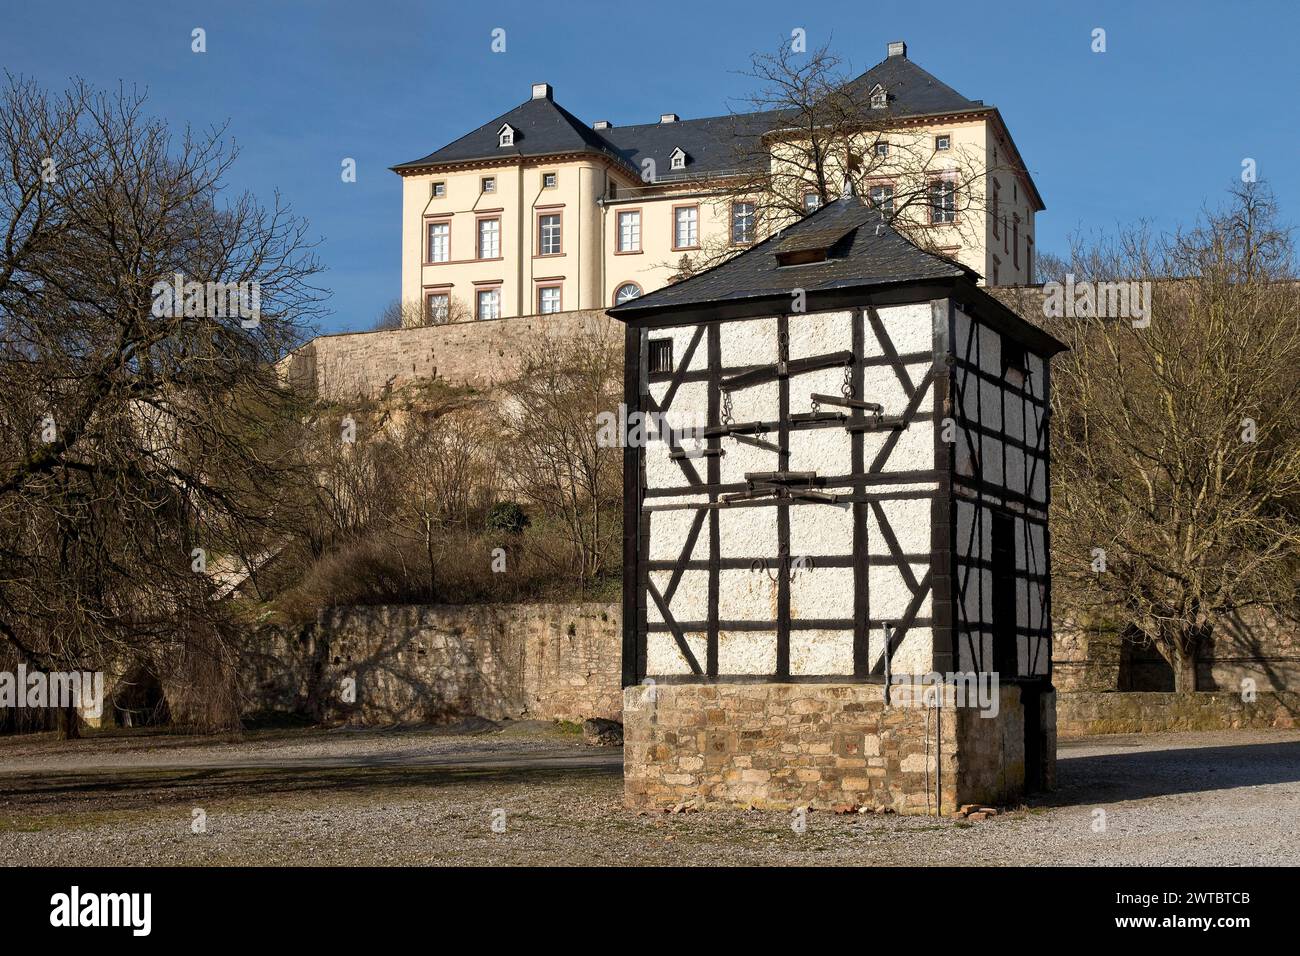 Pigeon tower in the courtyard of Canstein Castle, Canstein Castle, Marsberg, Sauerland, North Rhine-Westphalia, Germany Stock Photo